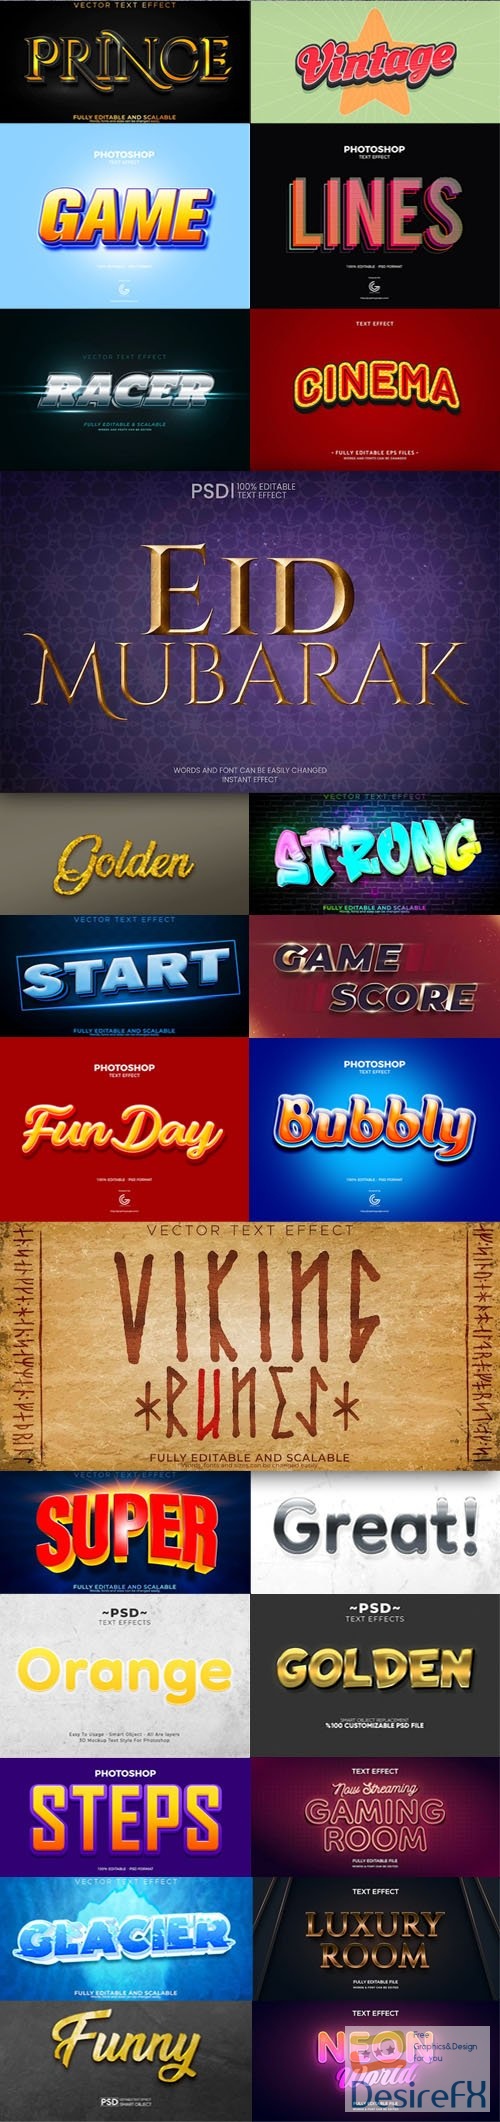 40+ Modern Editable Text Effects for Photoshop & Illustrator